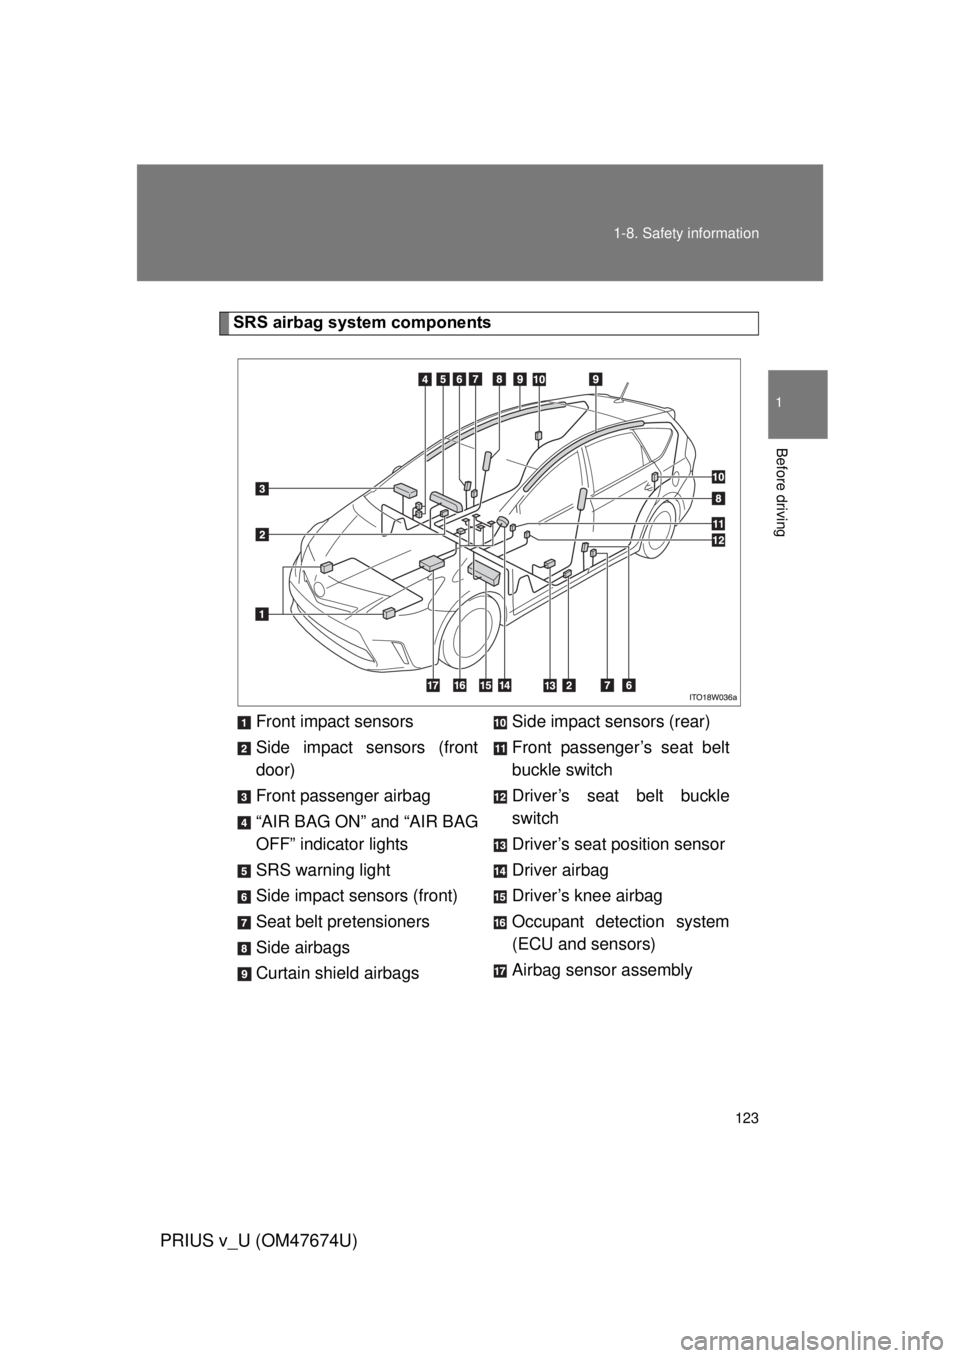 TOYOTA PRIUS V 2012  Owners Manual (in English) 123
1-8. Safety information
1
Before driving
PRIUS v_U (OM47674U)
SRS airbag system components
Front impact sensors
Side impact sensors (front
door)
Front passenger airbag
“AIR BAG ON” and “AIR 